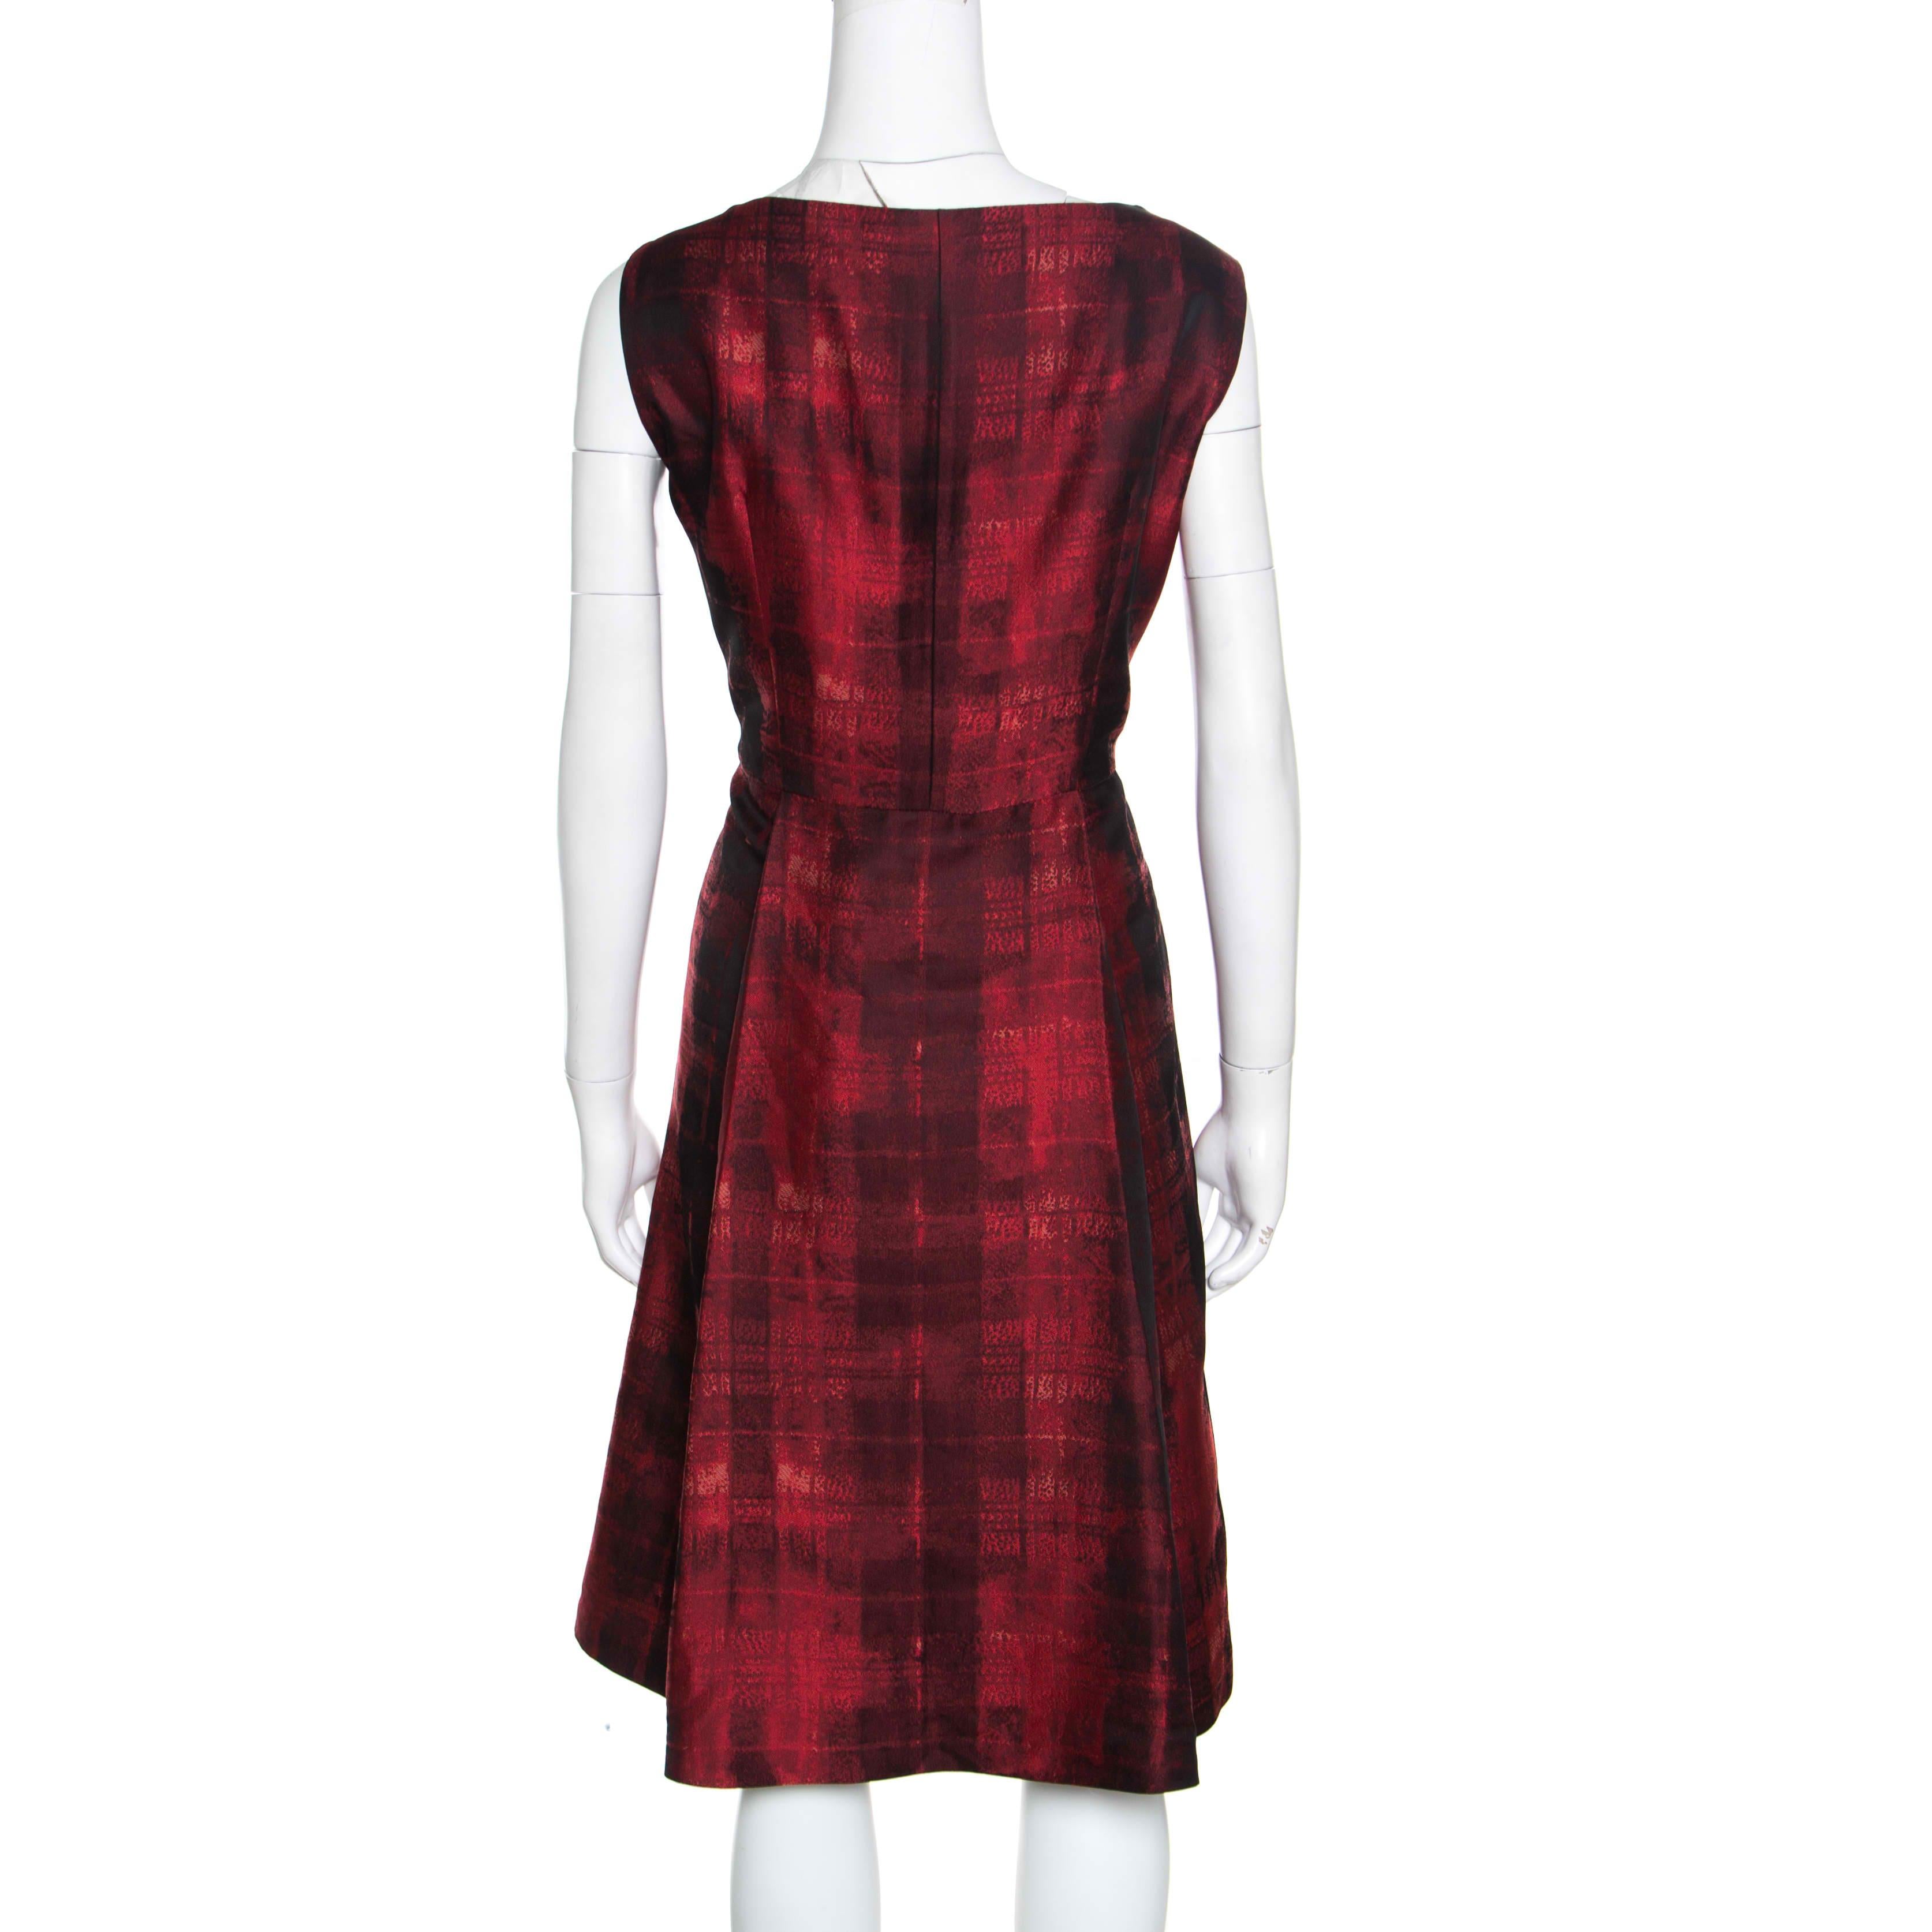 Ditch those mundane dresses and go for a glam, statement-making style with this CH Carolina Herrera dress. This red and black dress with abstract patterns is the best way to stand out in a world full of generics. Flawlessly designed from blended